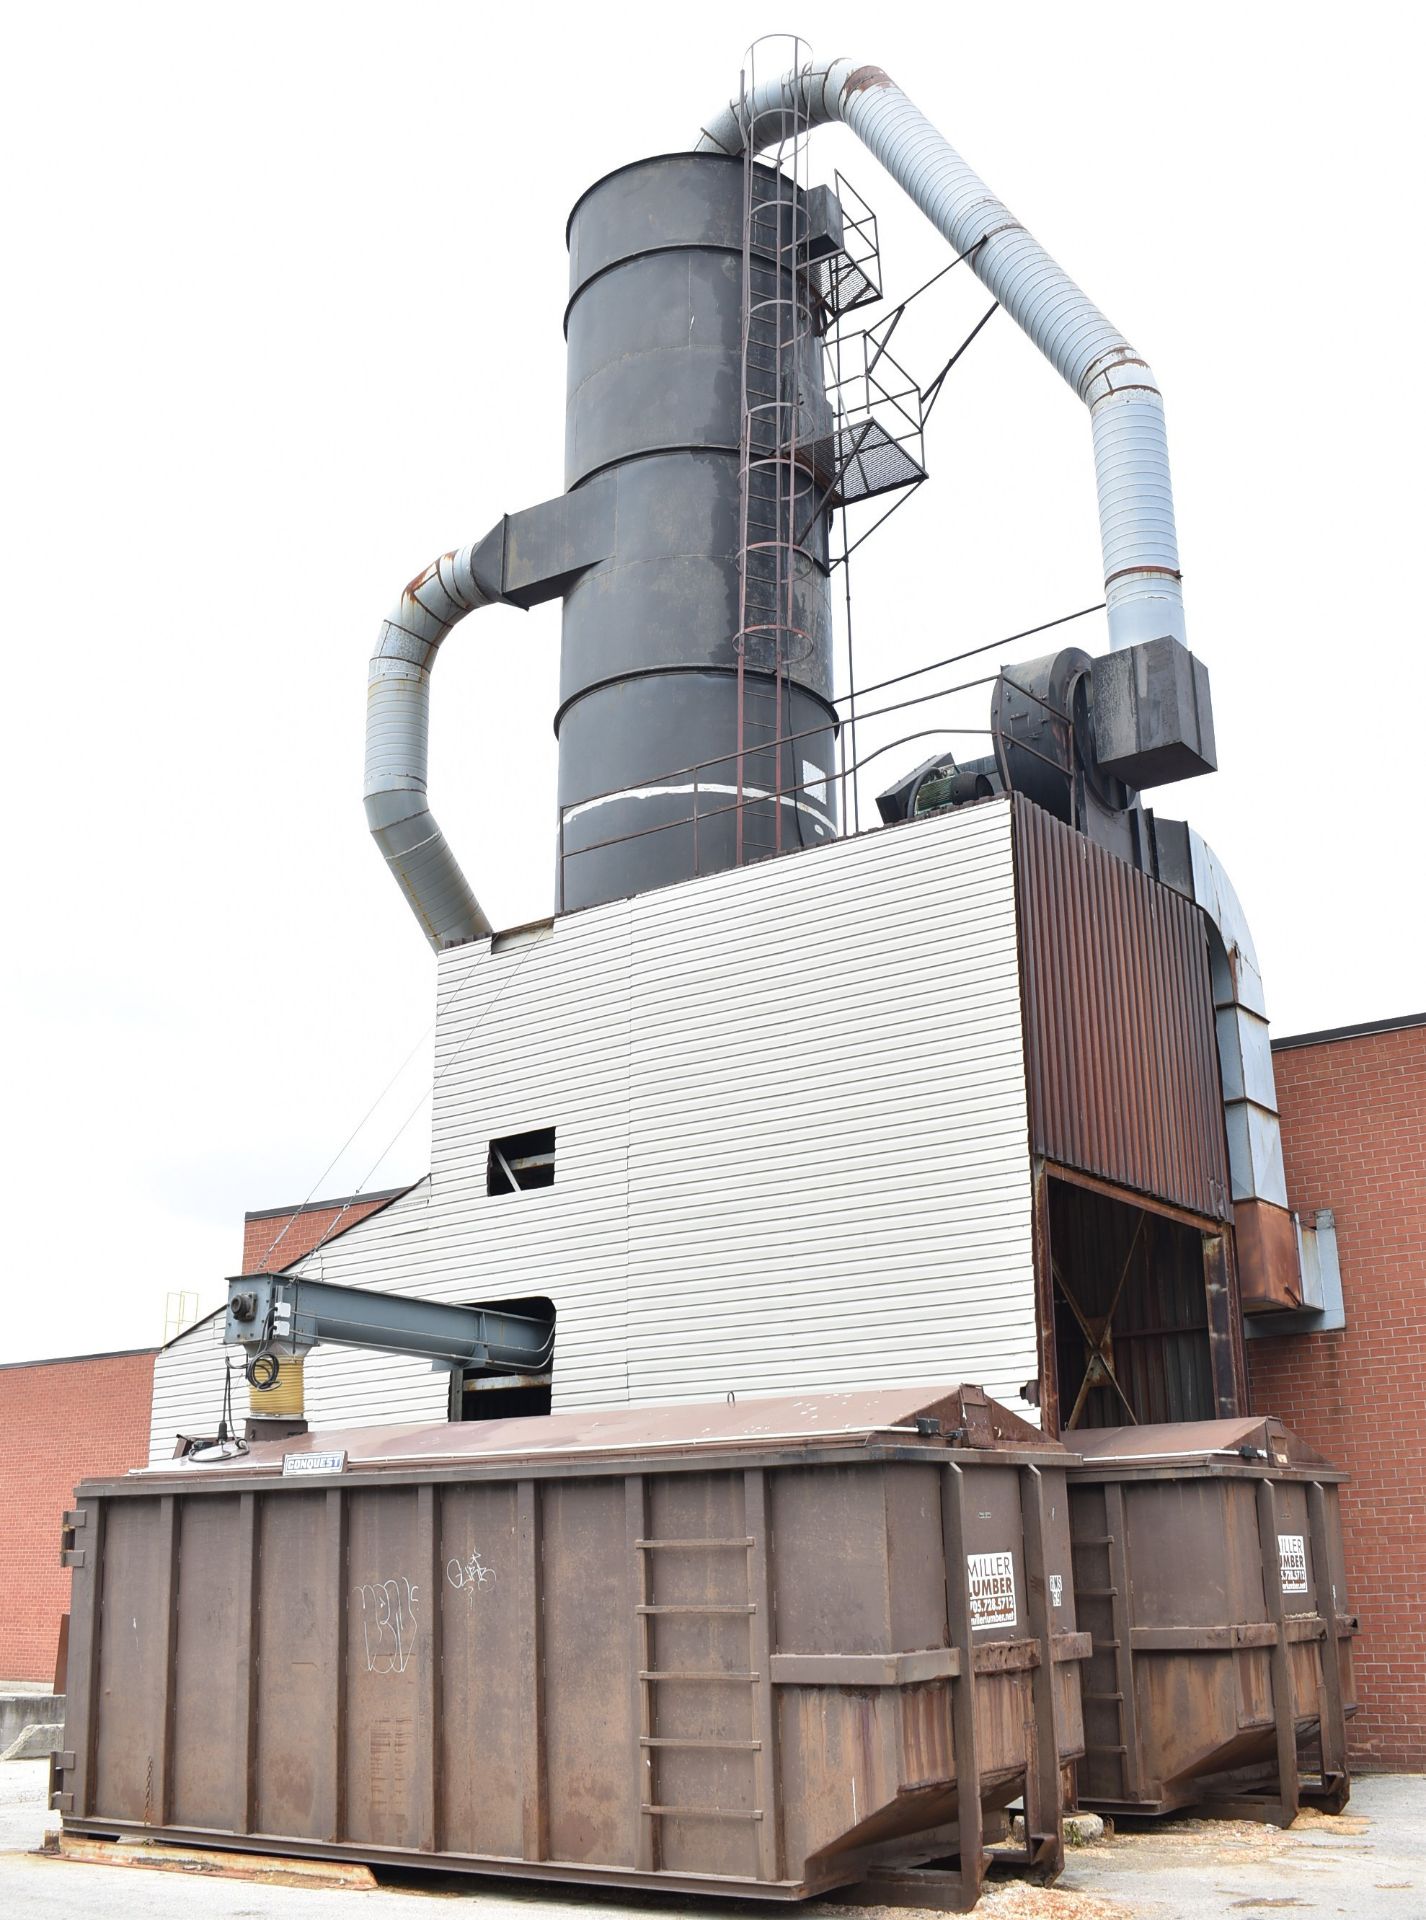 KRAEMER TOOL & MFG 60 HP DUST COLLECTION SYSTEM WITH 16,200 CFM CAPACITY, UPGRADED NORTHRIDGE